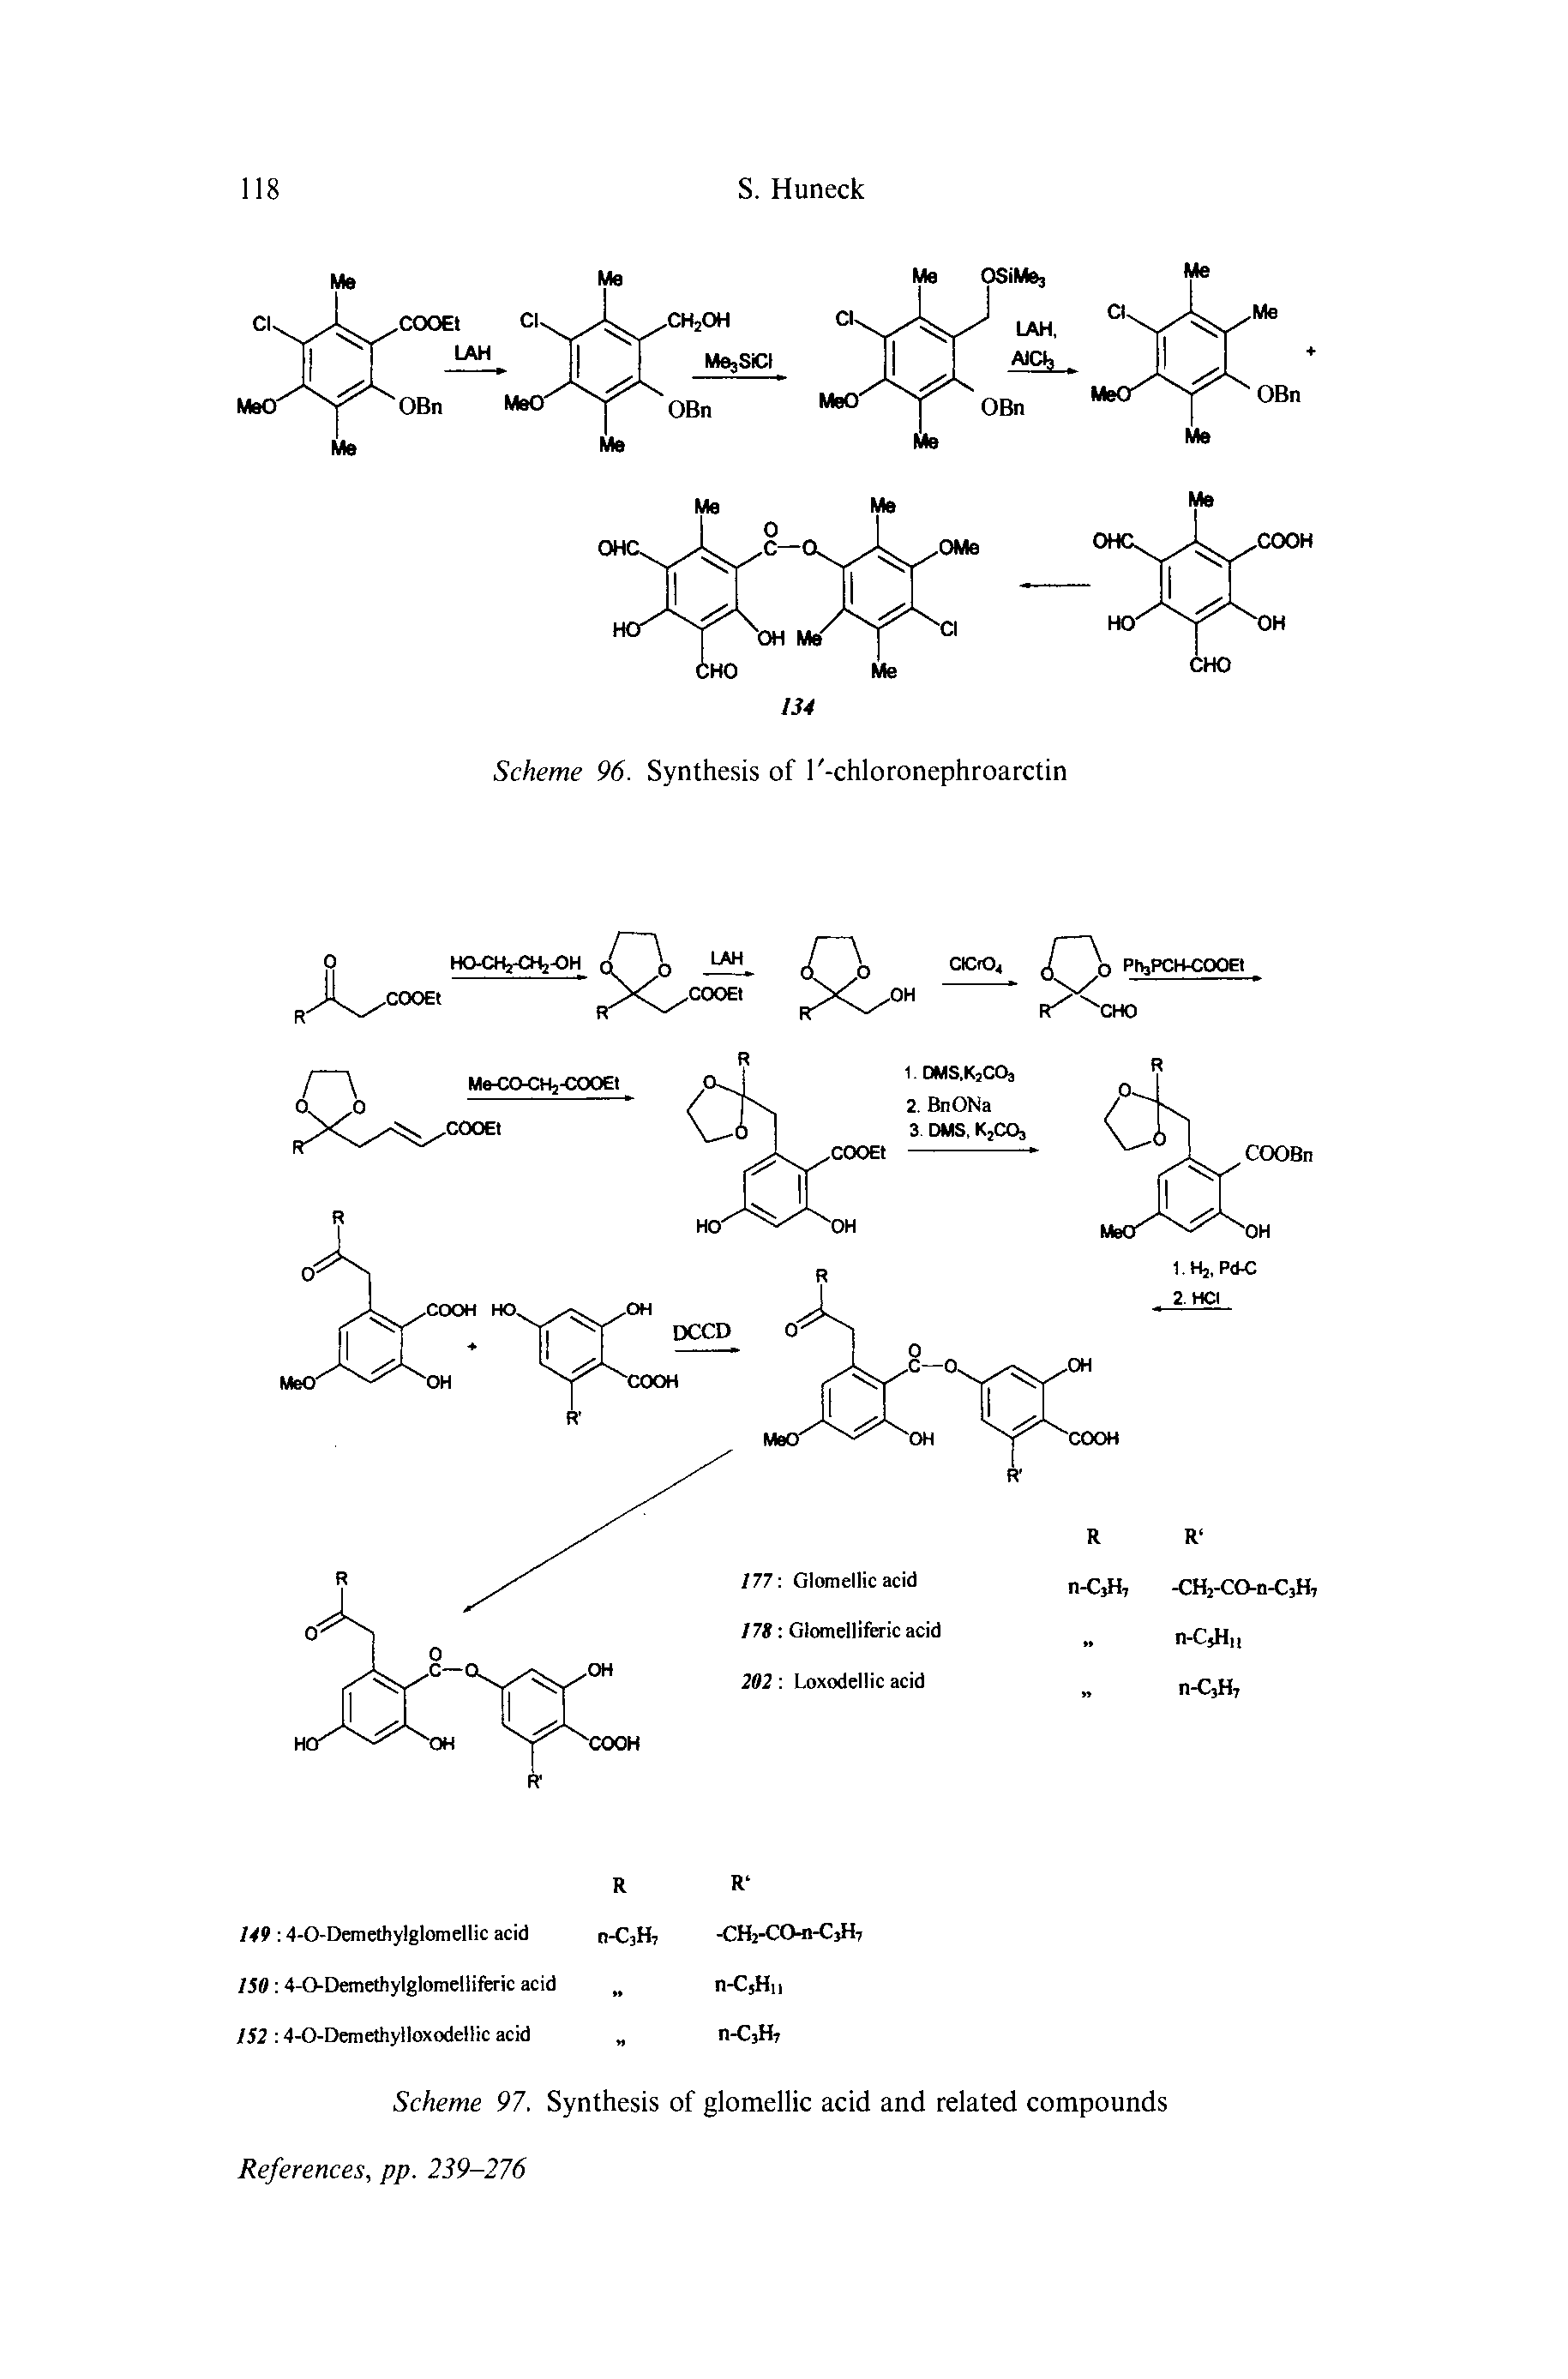 Scheme 97. Synthesis of glomellic acid and related compounds References, pp. 239-276...